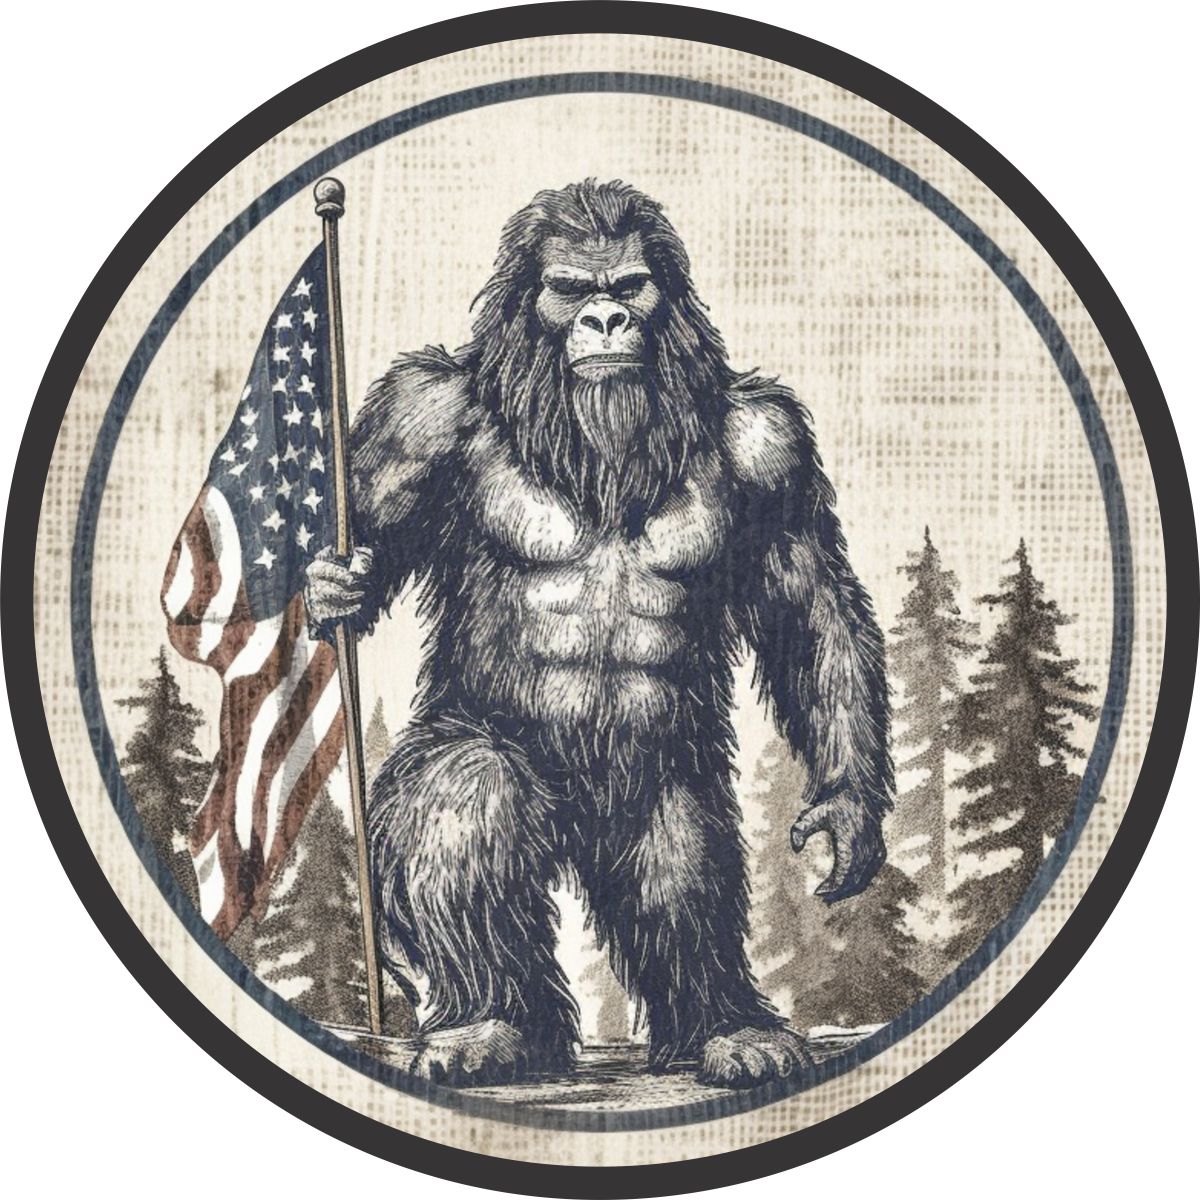 Sasquatch spare tire cover design meant to look like a sketched drawing of bigfoot standing in the forest holding an American flag.